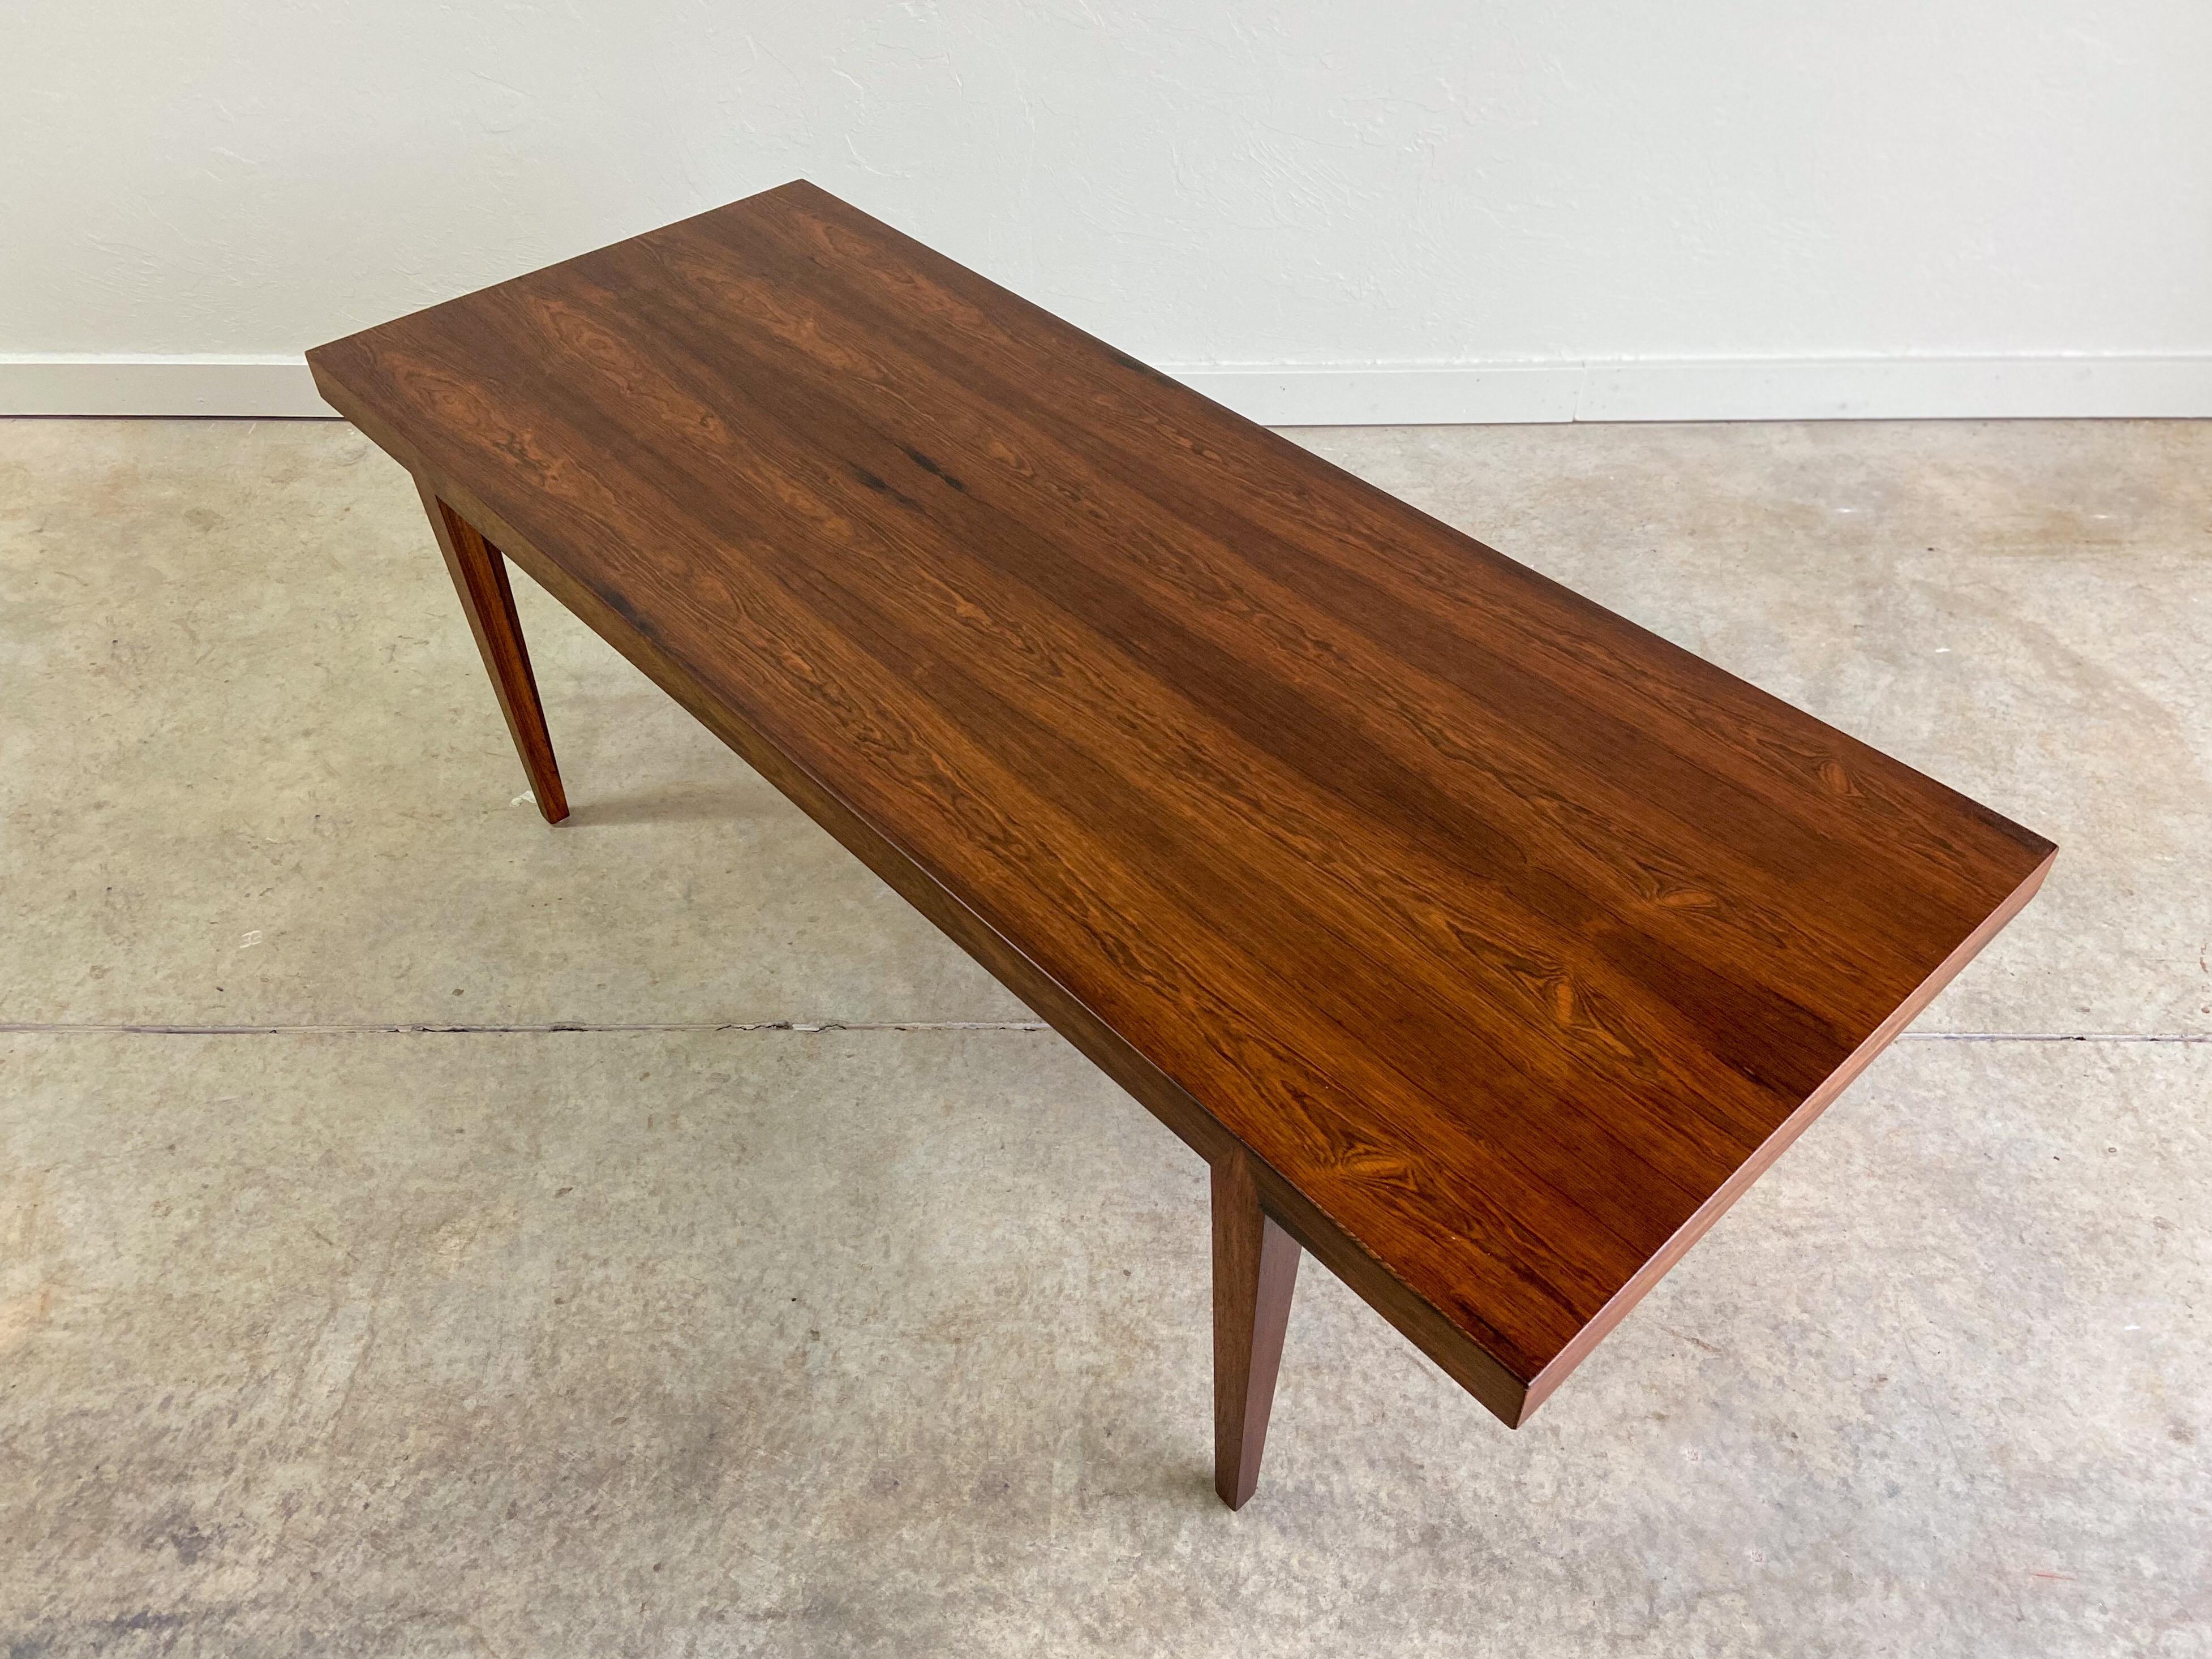 A rosewood coffee table designed by Severin Hansen. A great example of minimalist Danish modern design. Table features lovely grain and beautiful joinery.

Lower shipping rates available.